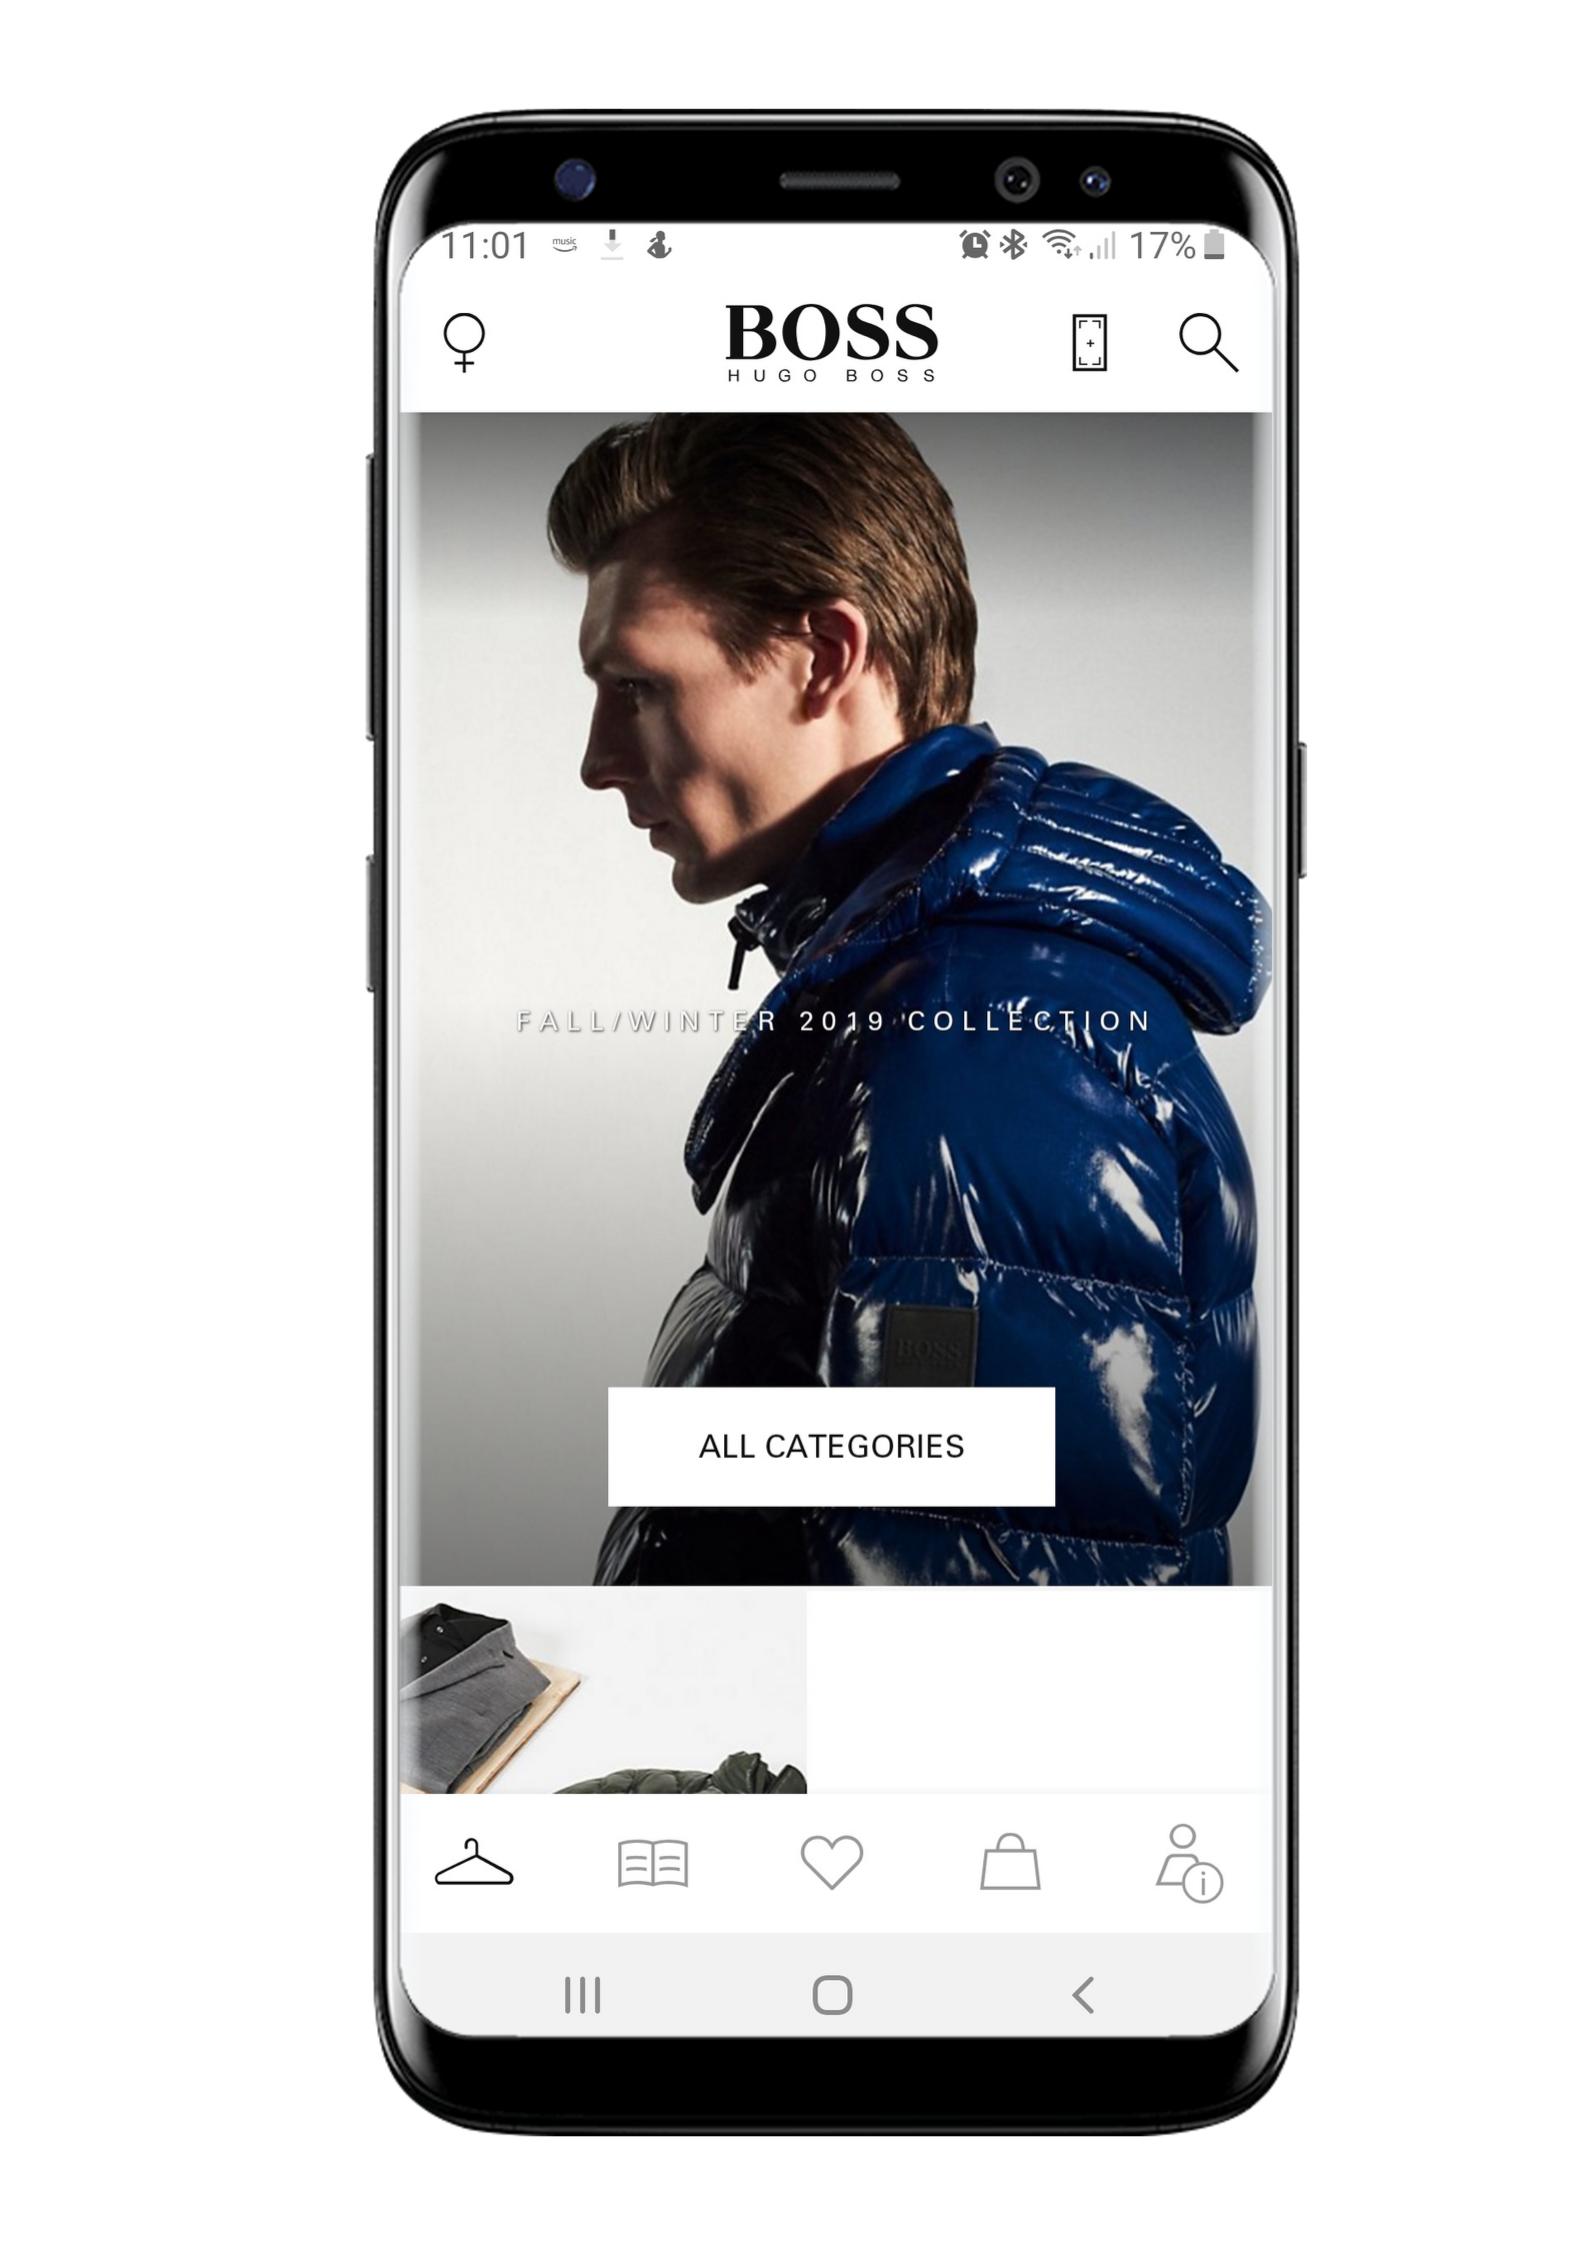 HUGO BOSS for Android - APK Download